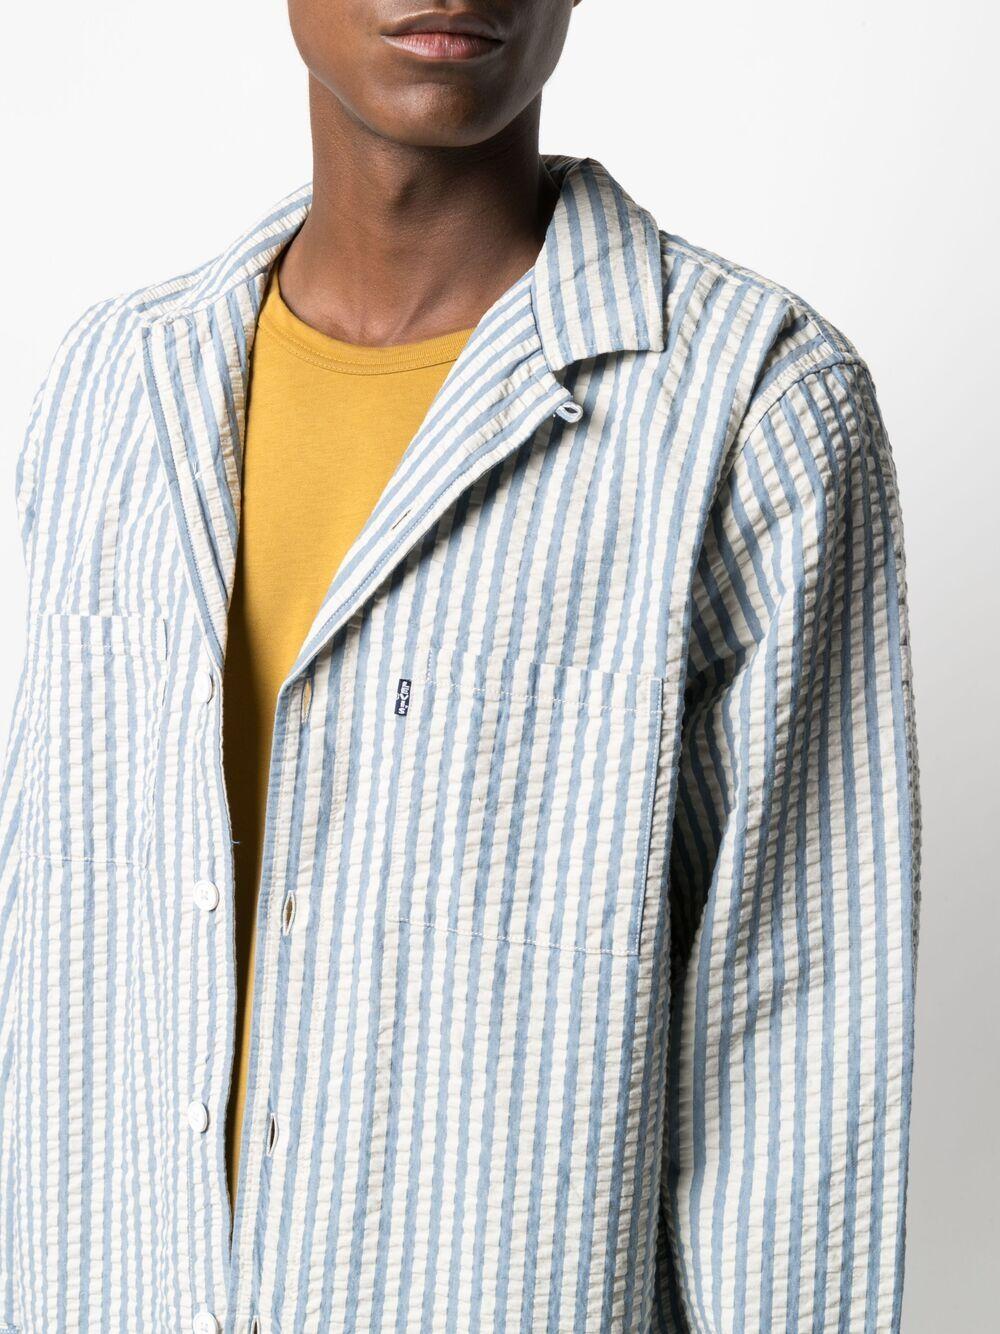 Levi's Striped Shirt Jacket in Blue for Men | Lyst